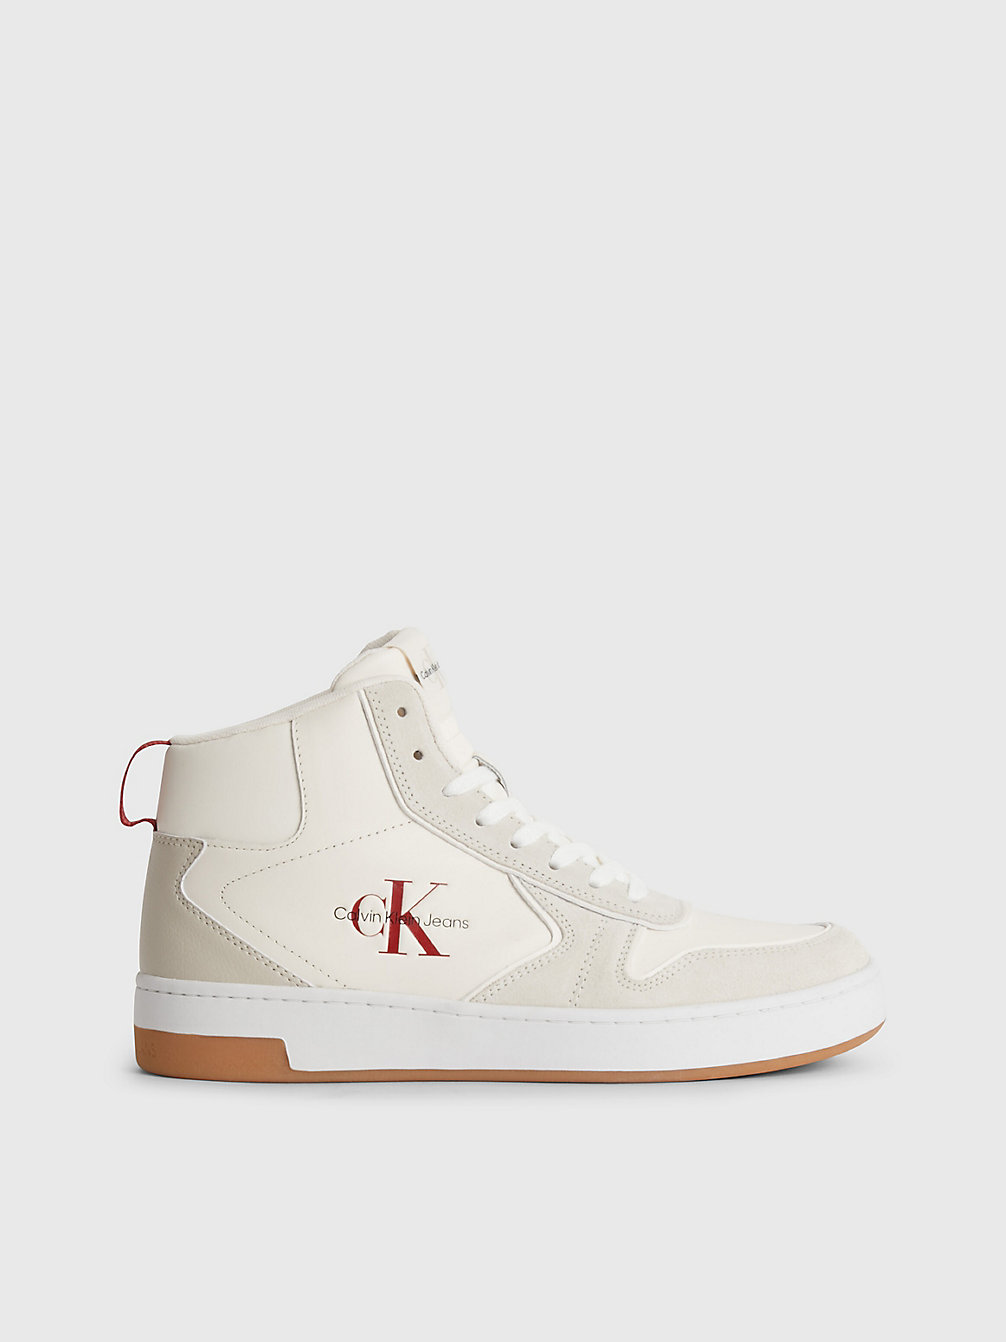 ANCIENT WHITE/EGGSHELL Leather High-Top Trainers undefined women Calvin Klein